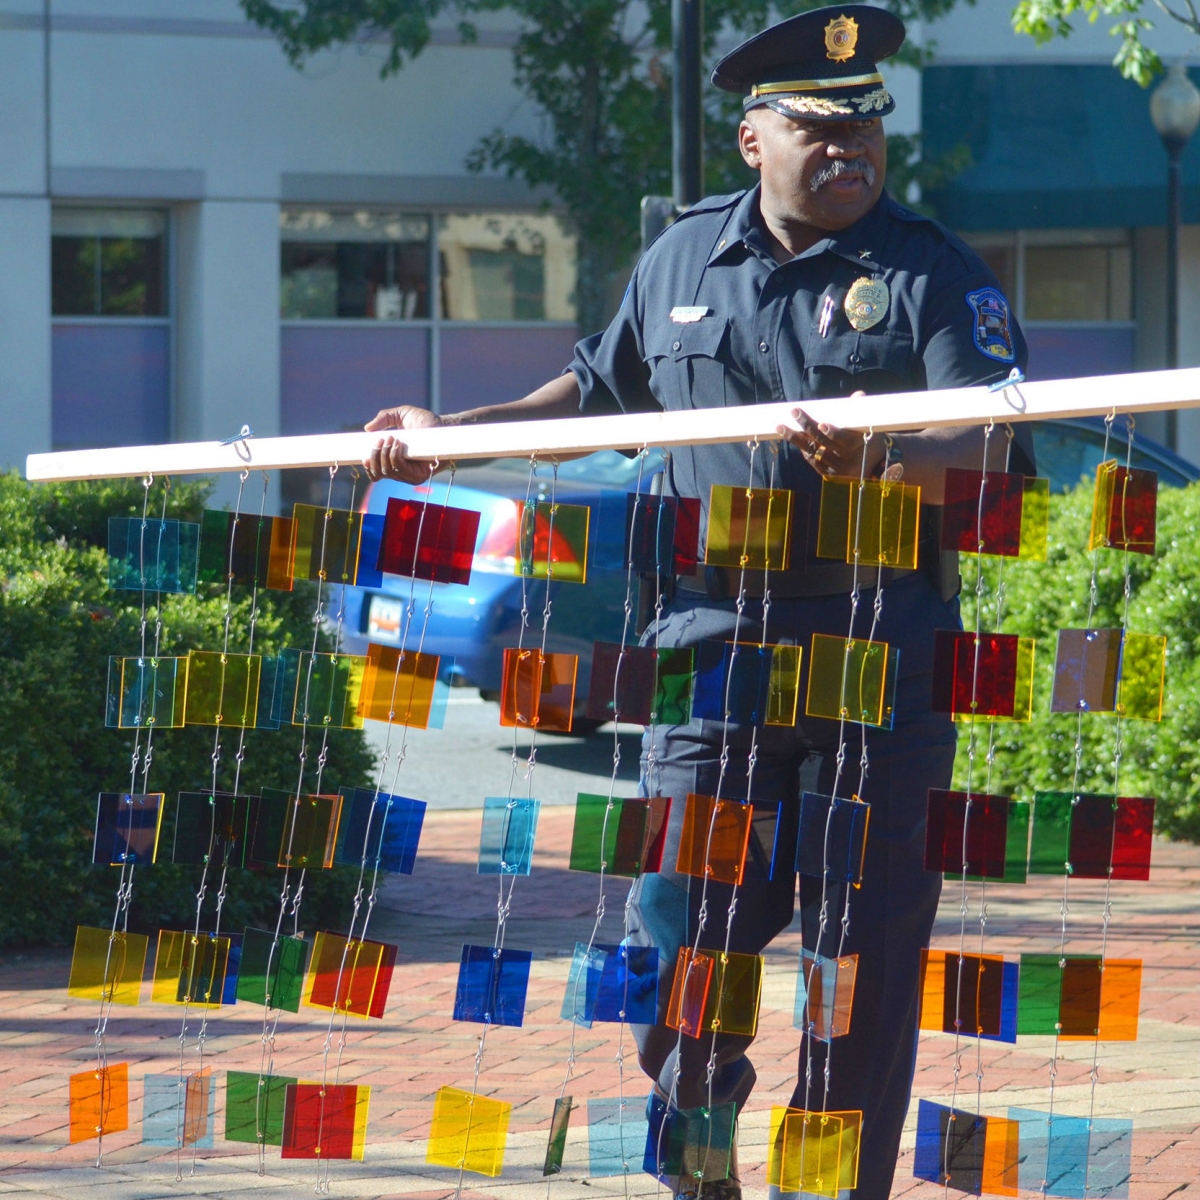 City of Spartanburg, Chief of Police Alonzo Thompson helping to assemble Downtown Mobile Suspension photo taken by Luke Connell, The Palladian Group.